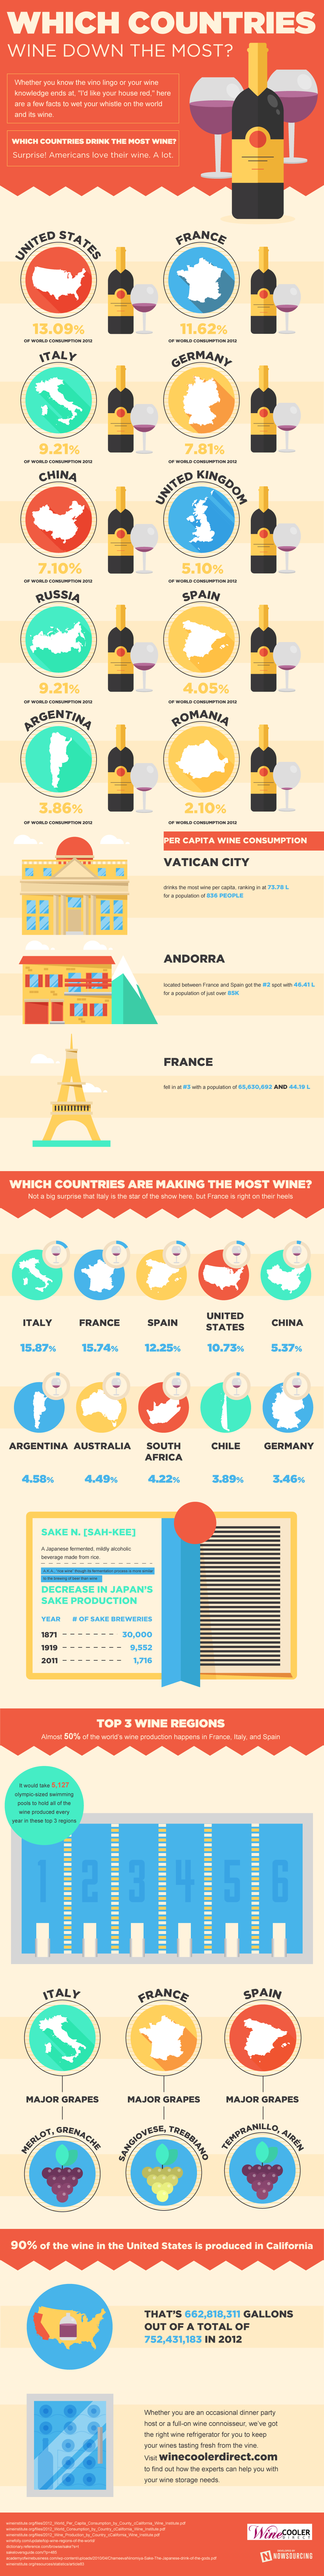 Which Countries Wine Down The Most?